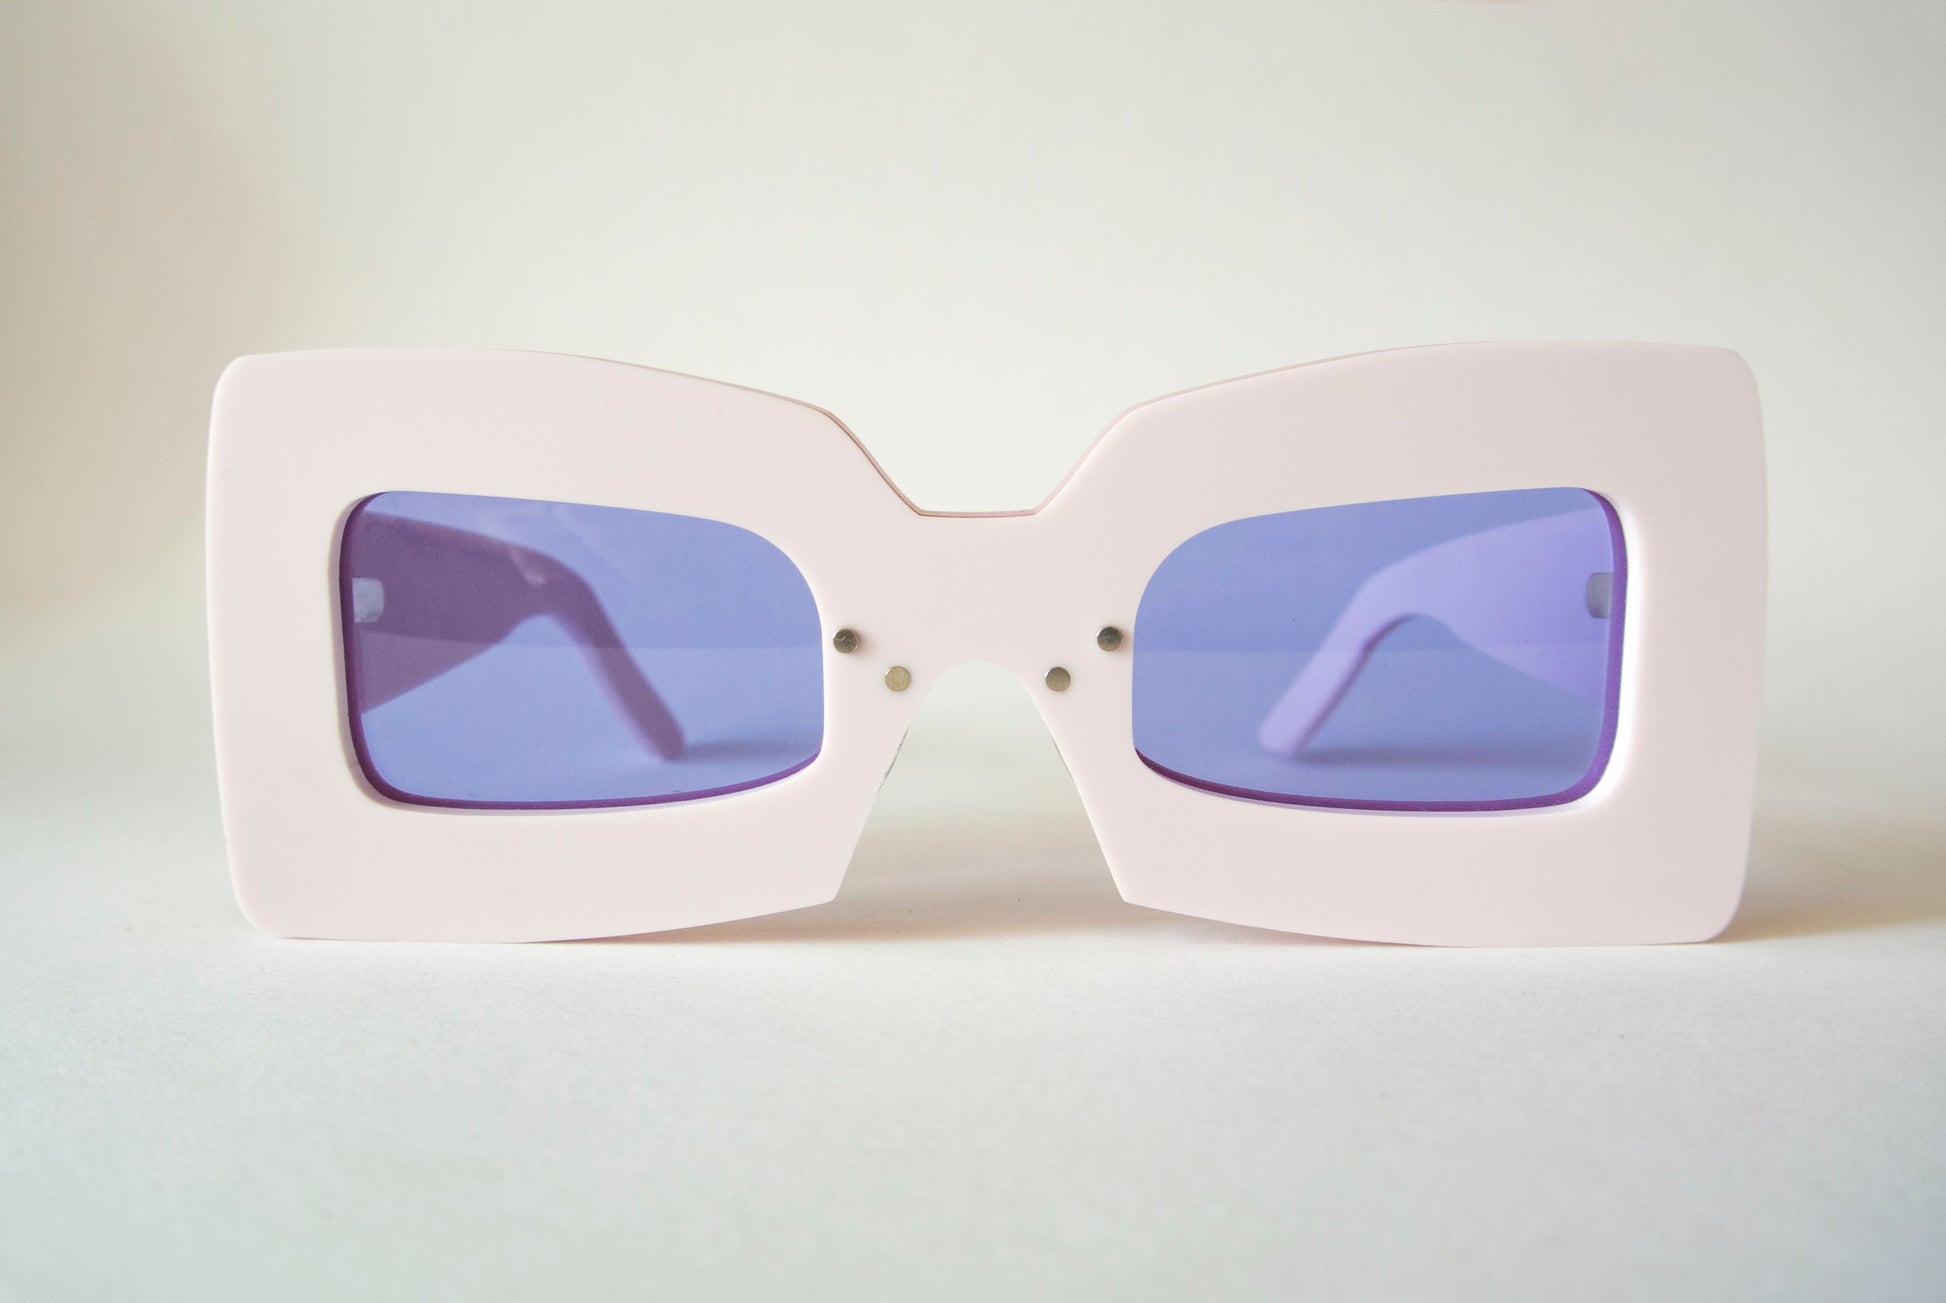 marshmallow pink square shaped glasses with violet lenses